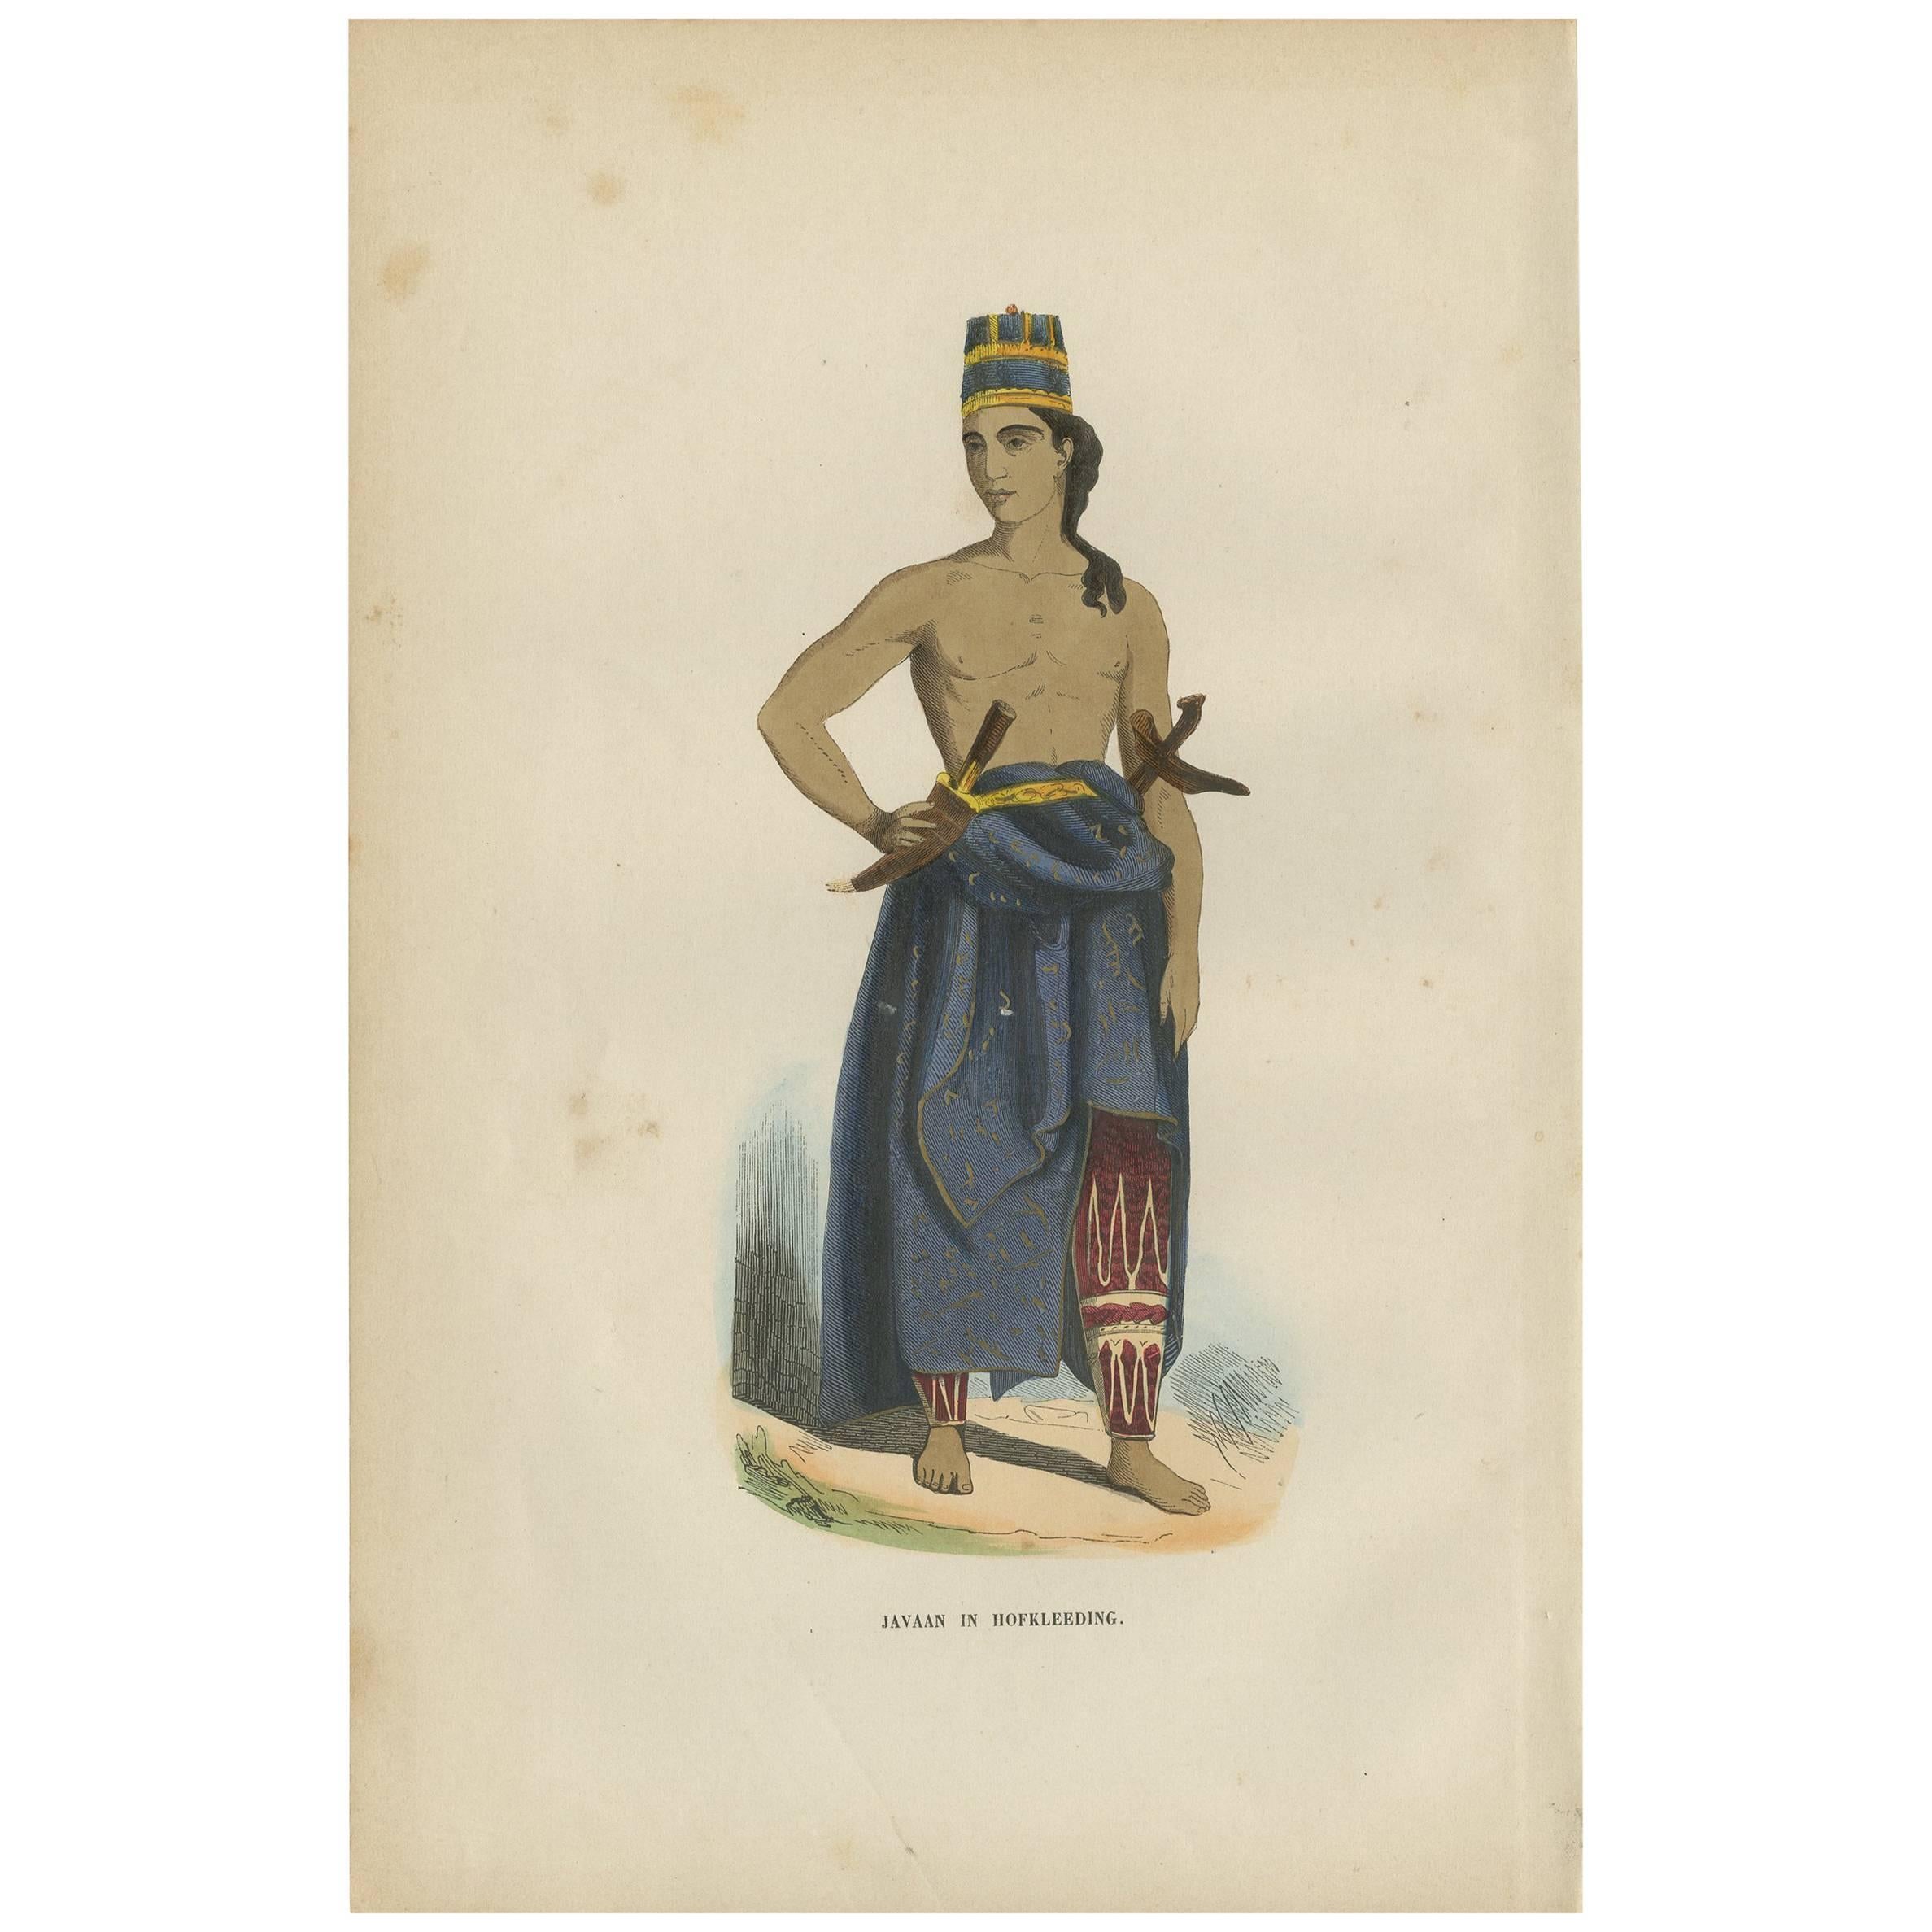 Antique Print of an Inhabitant of Java in Costume by H. Berghaus, 1855